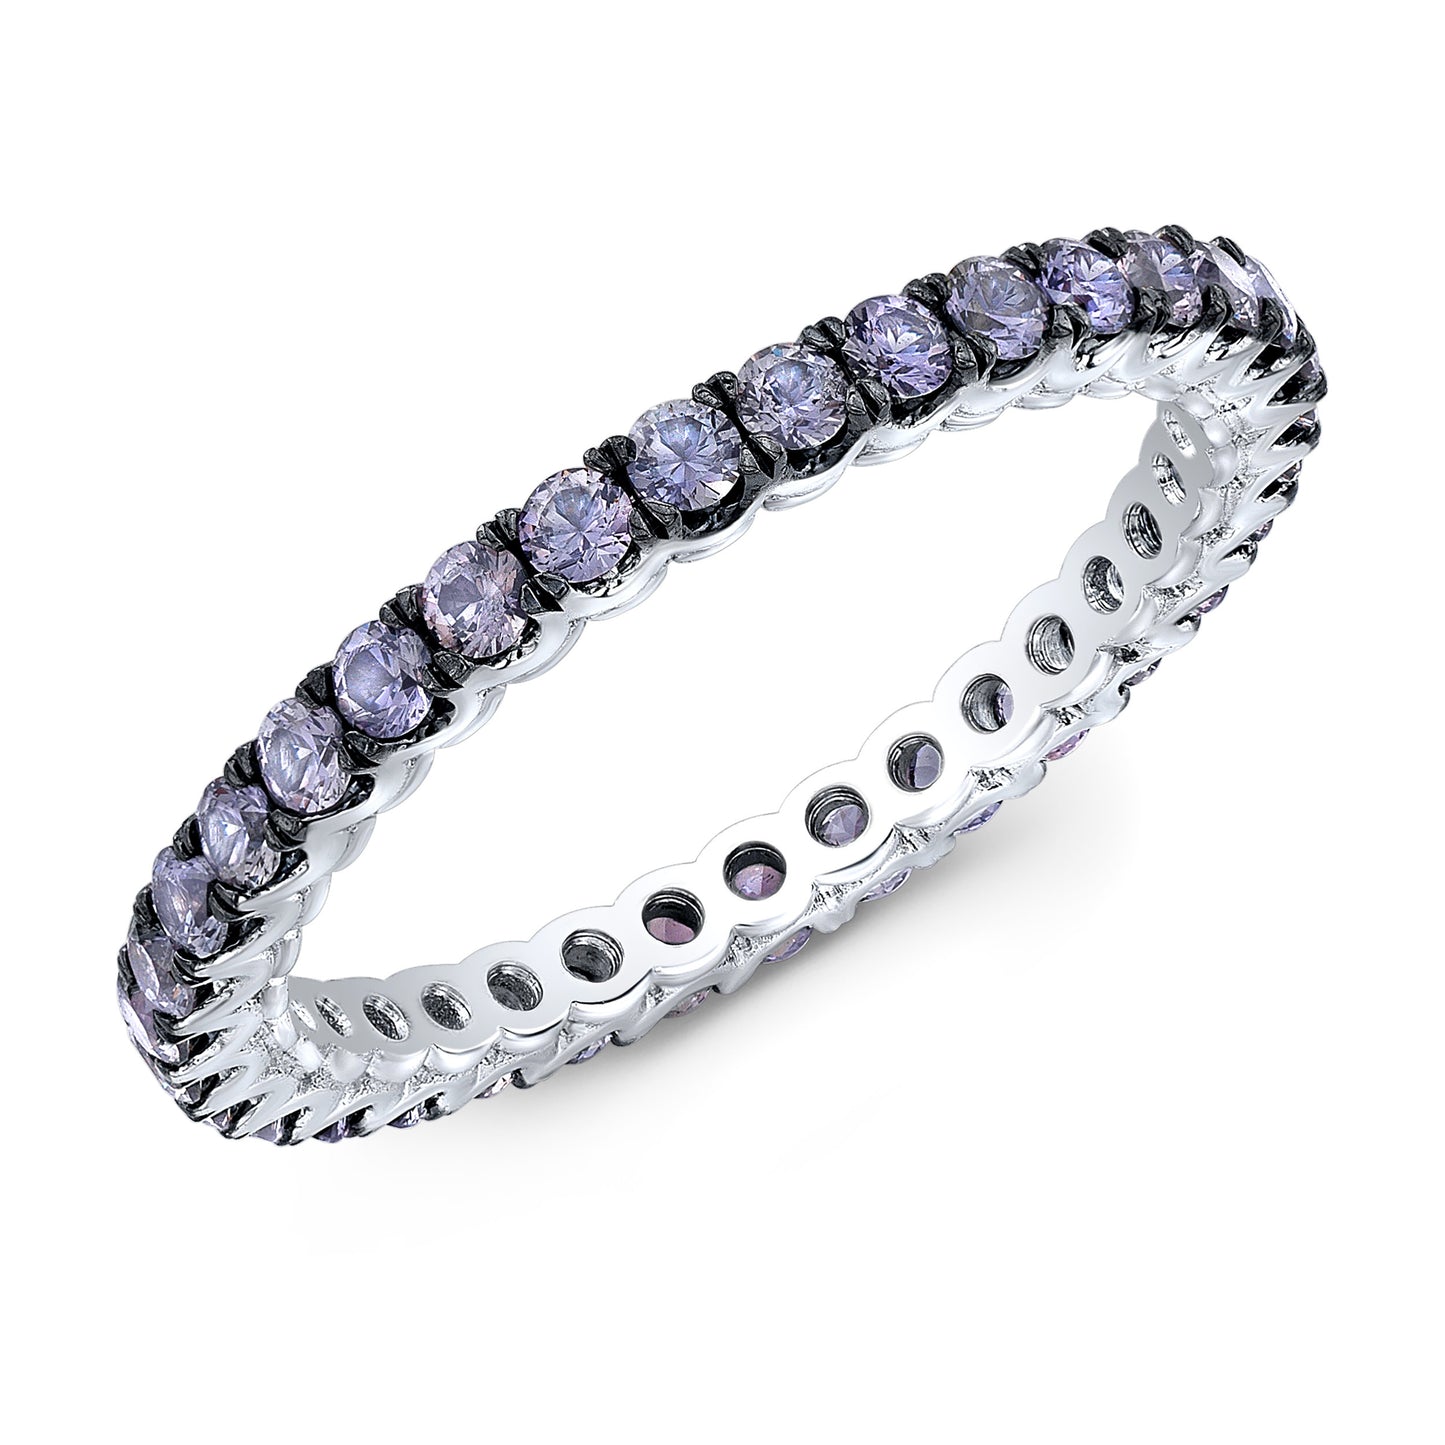 Lavender Sapphire Eternity Band set in 18kt White Gold